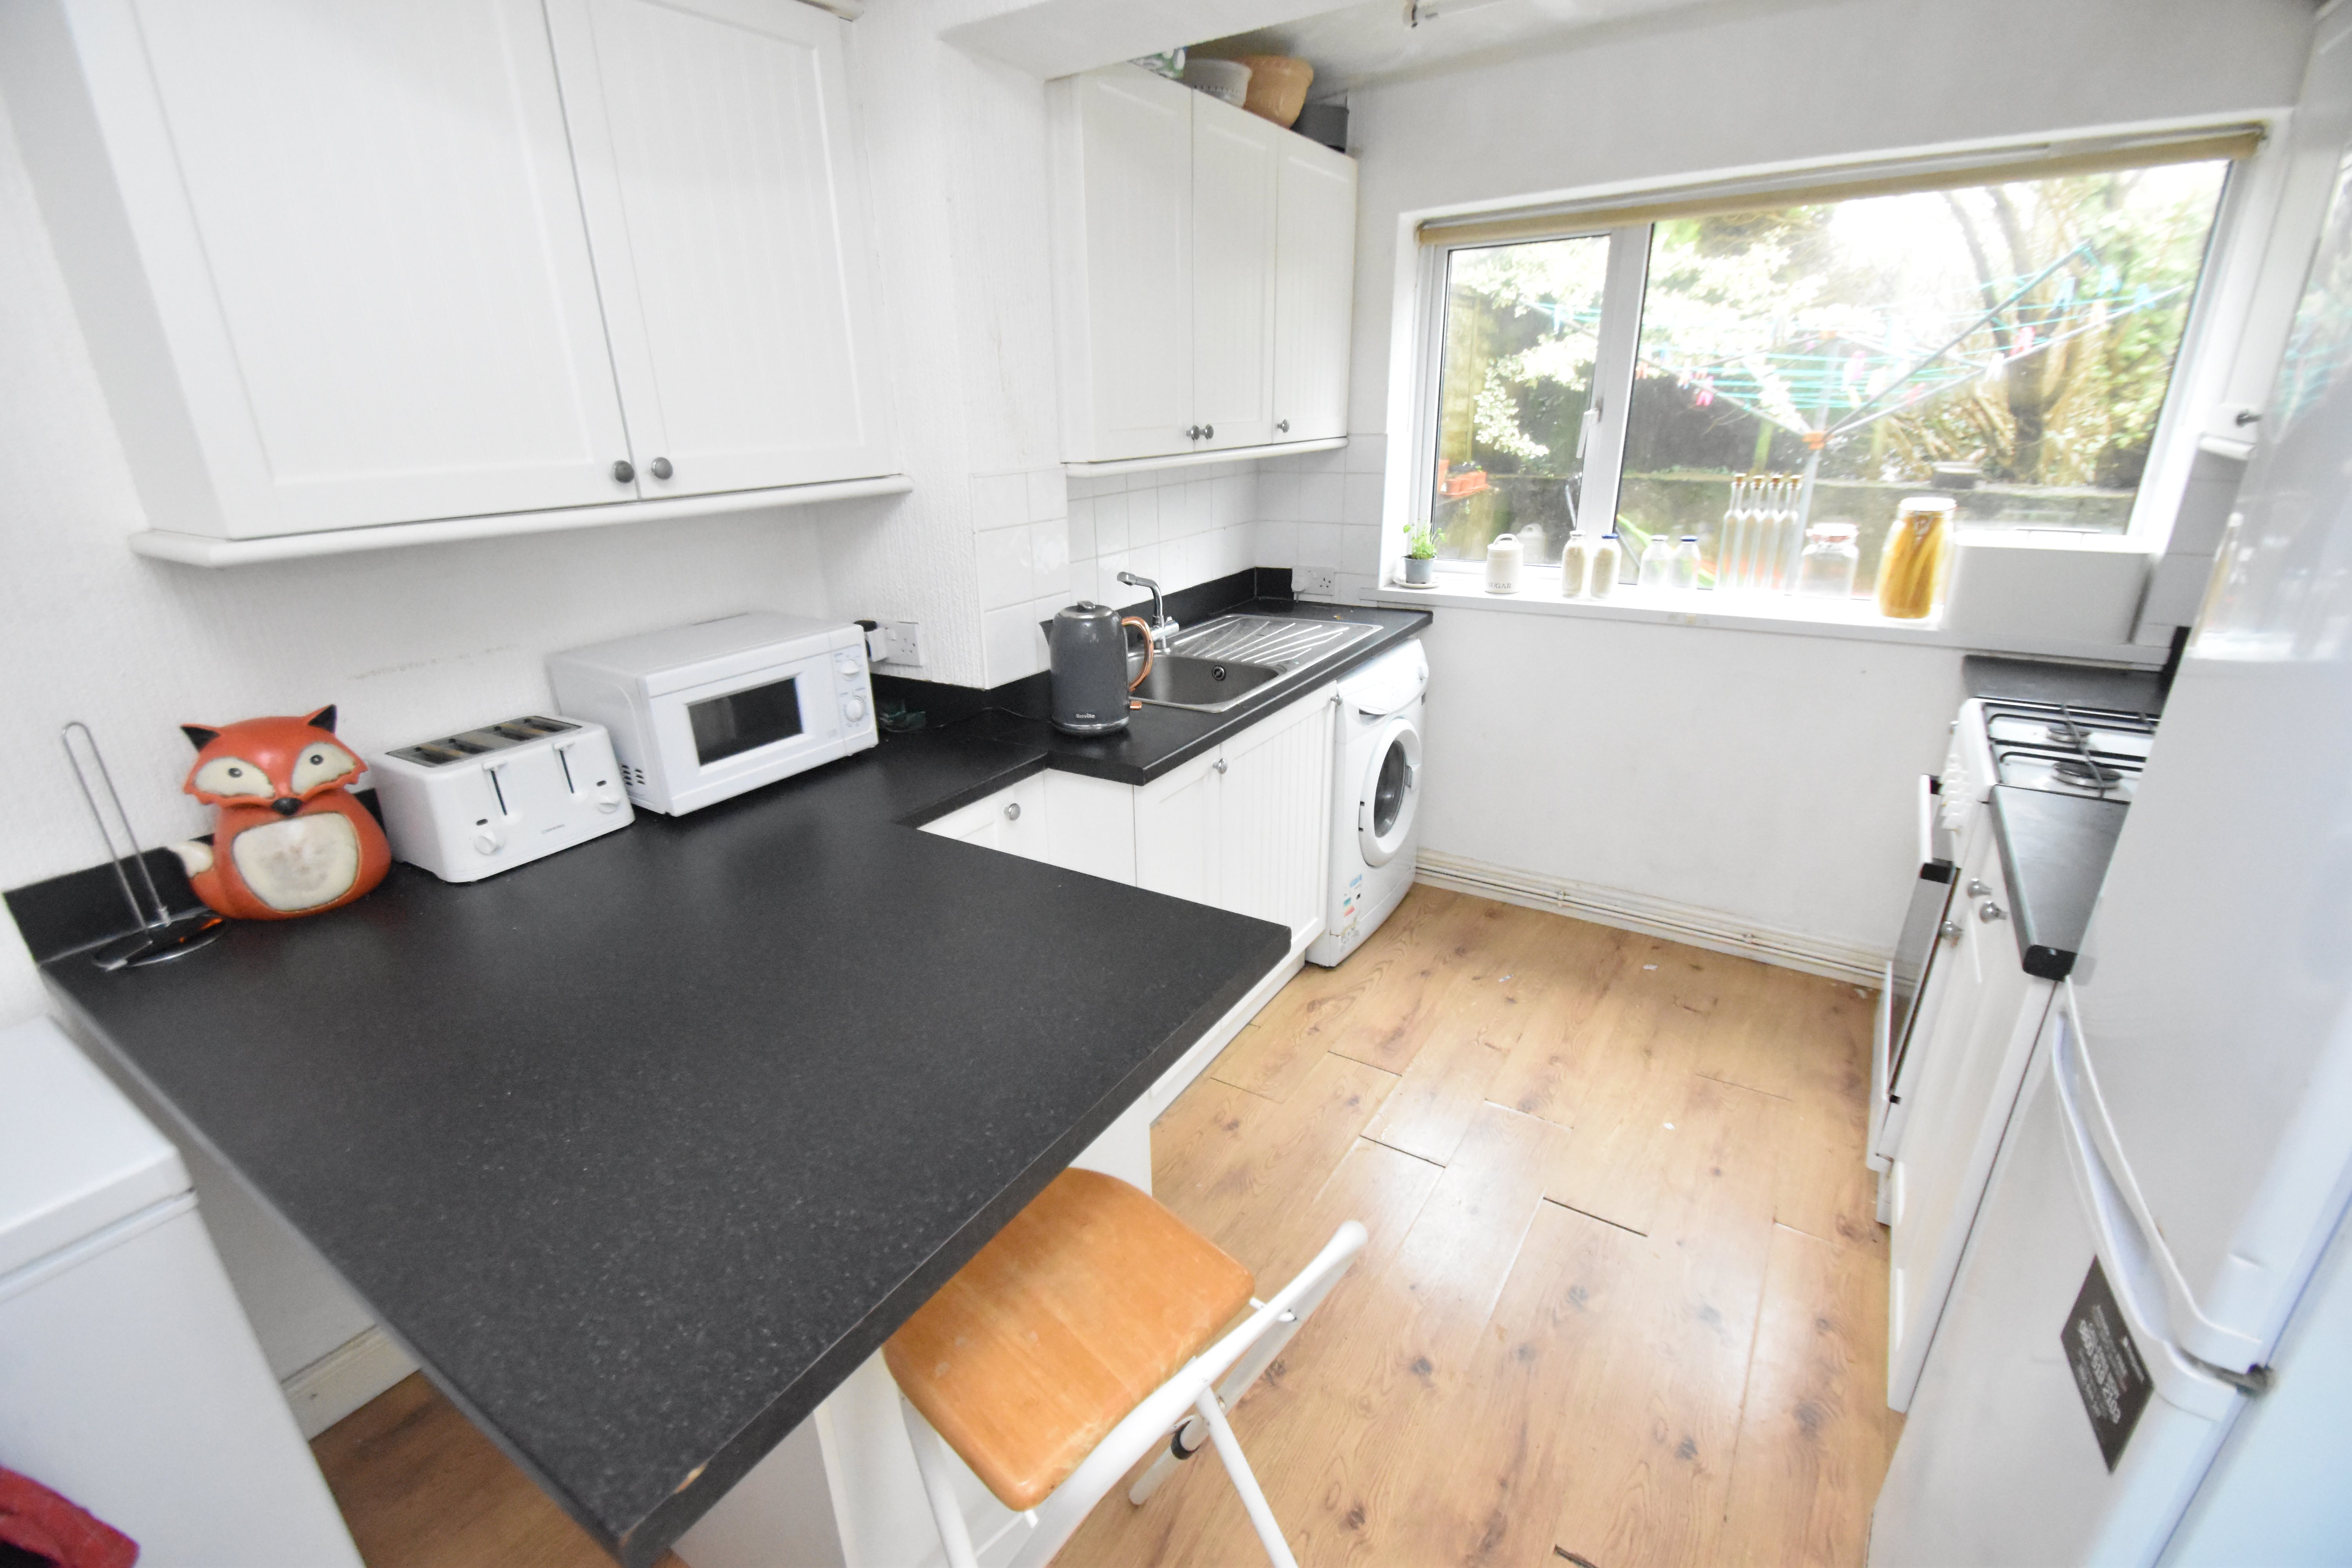 4 bed house to rent in Angus Street, Roath - Property Image 1